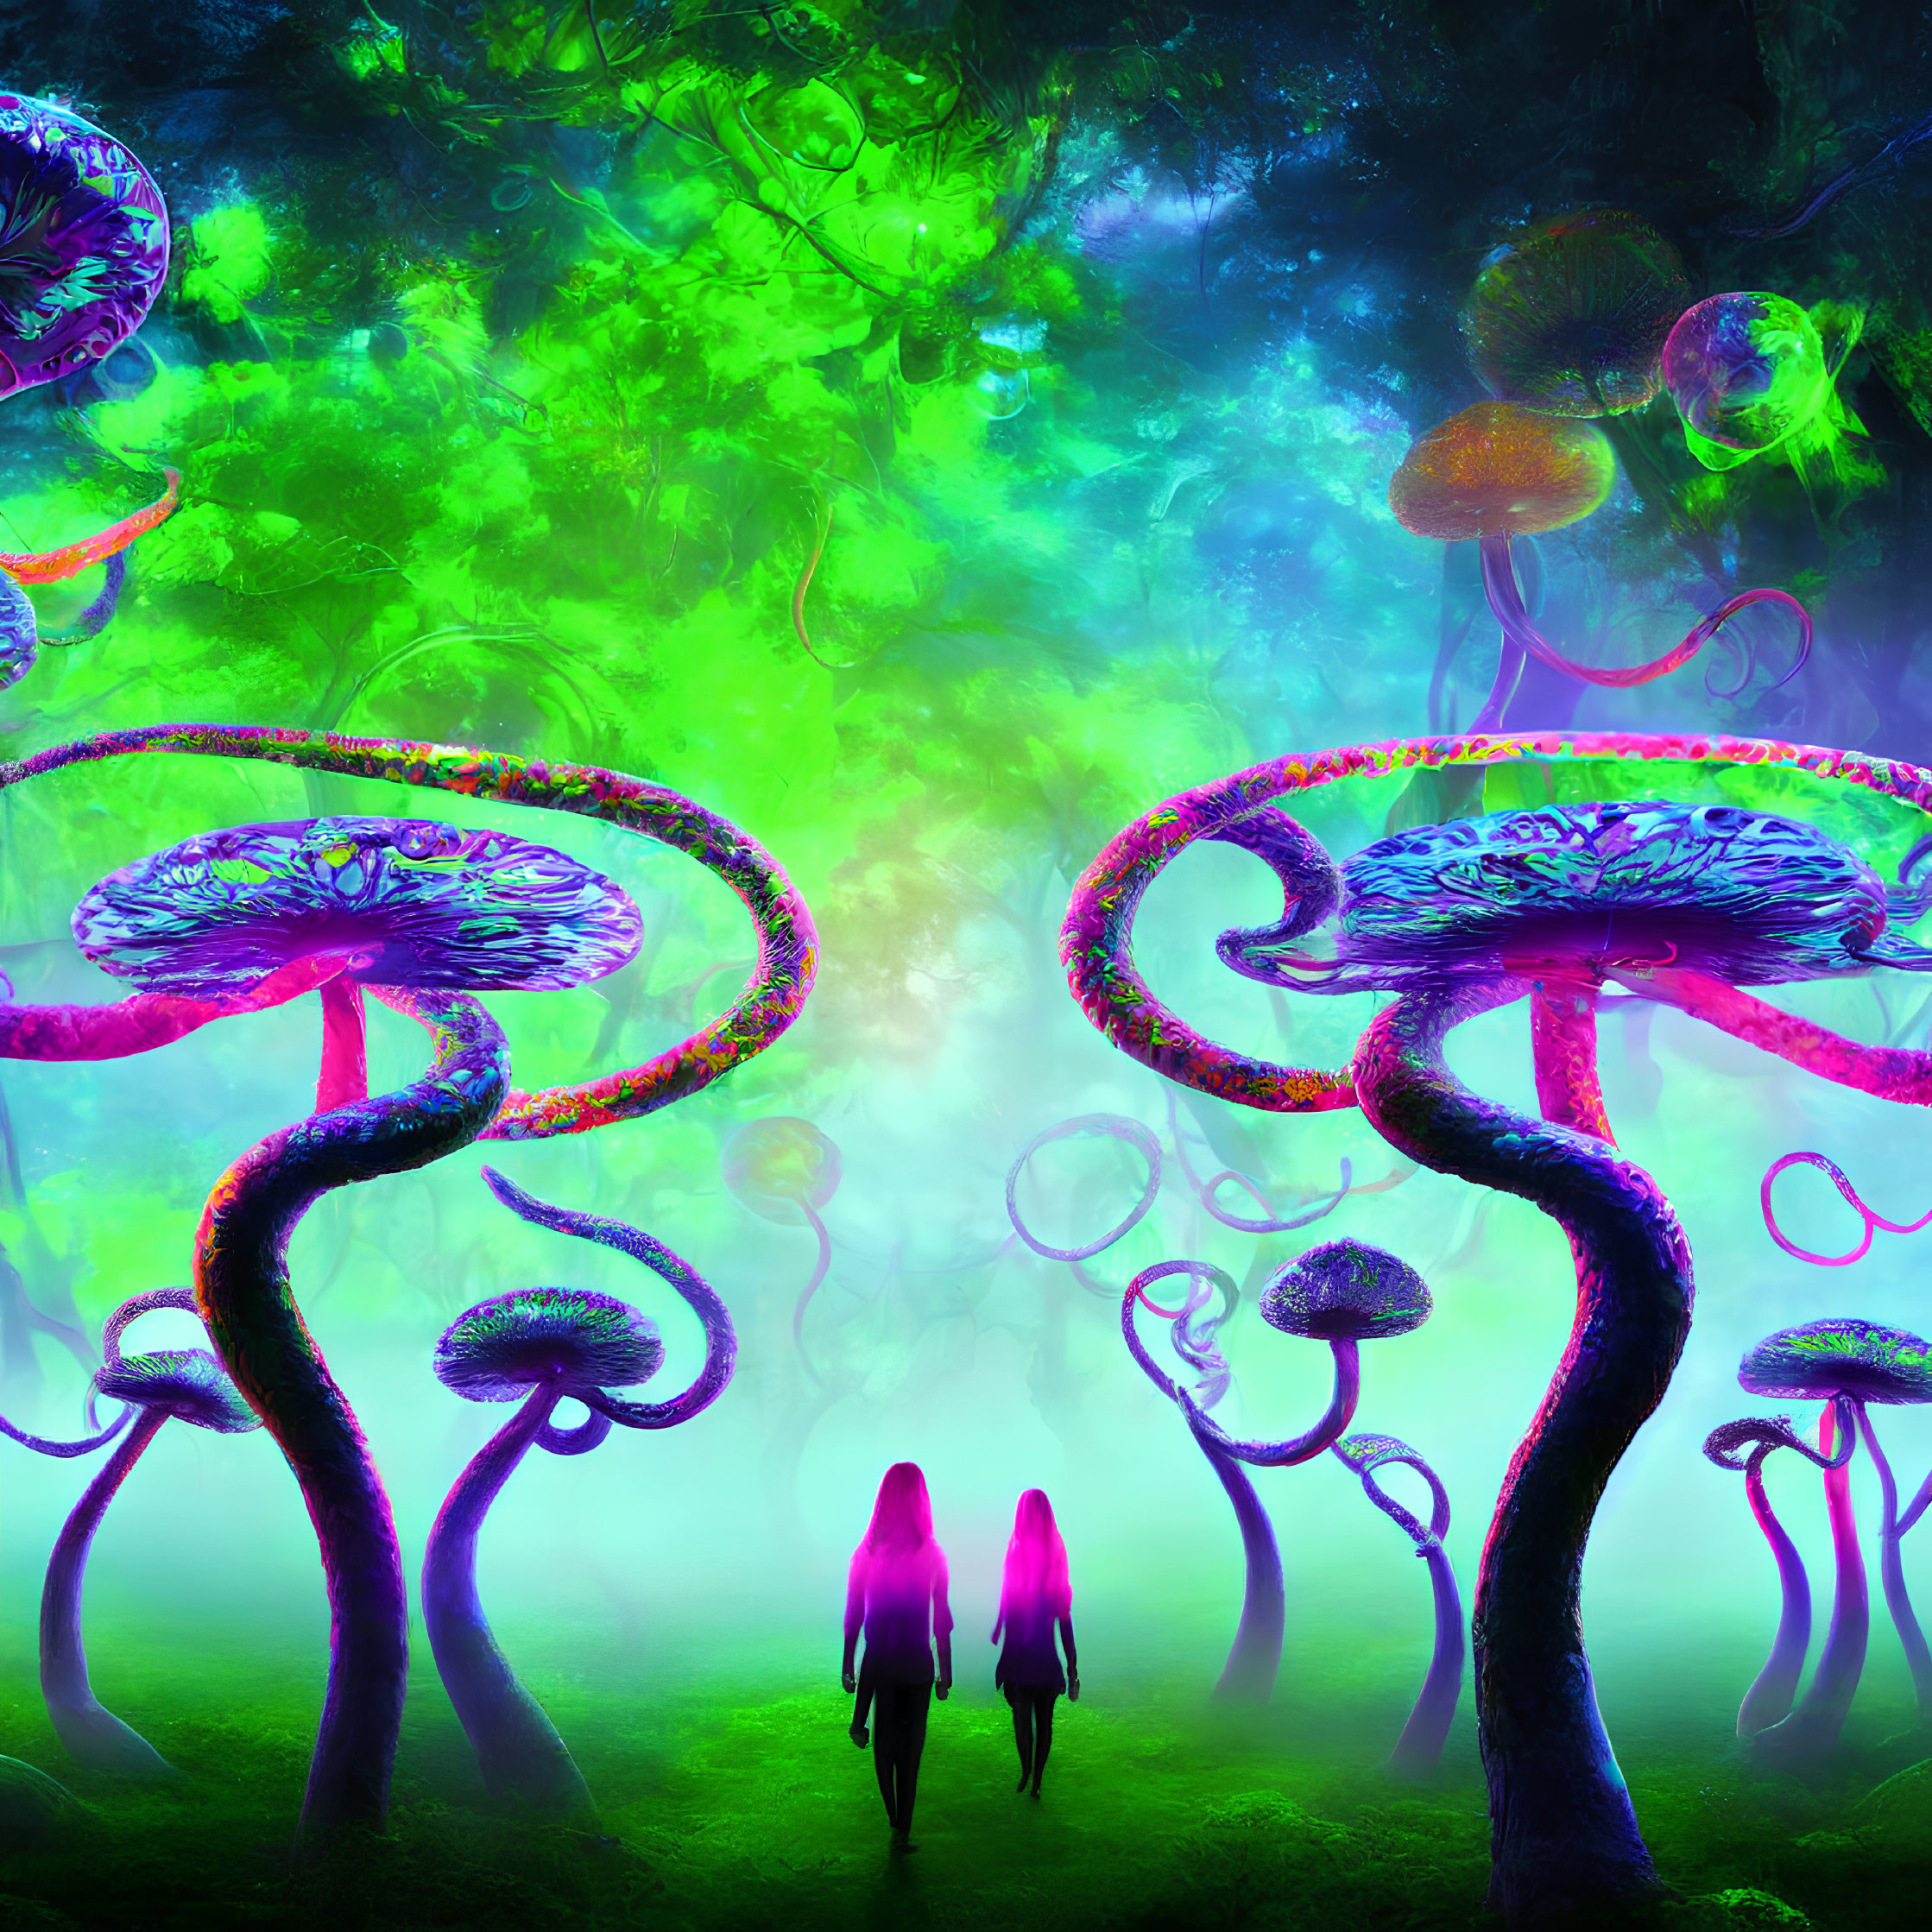 Enchanted forest with glowing trees and jellyfish, silhouetted figures approaching